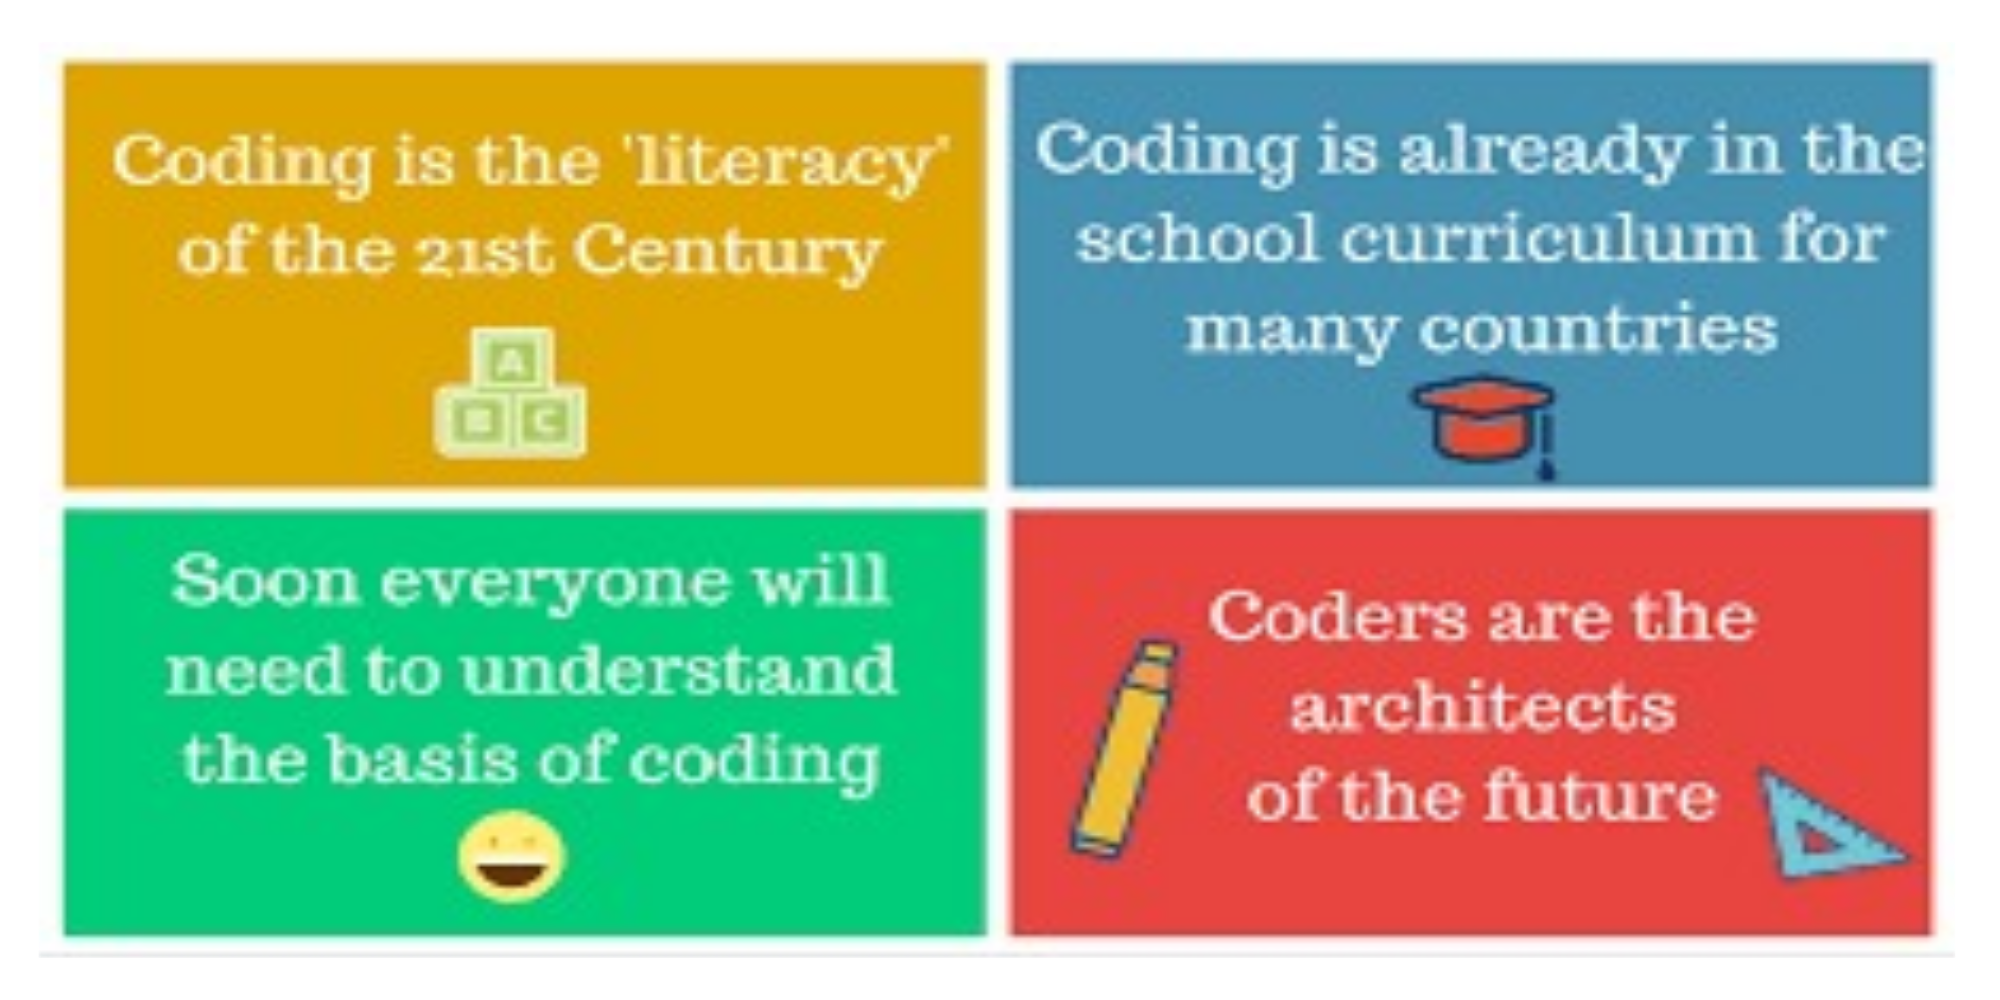 Coding: A Tool for developing 21st Century Skills in Children